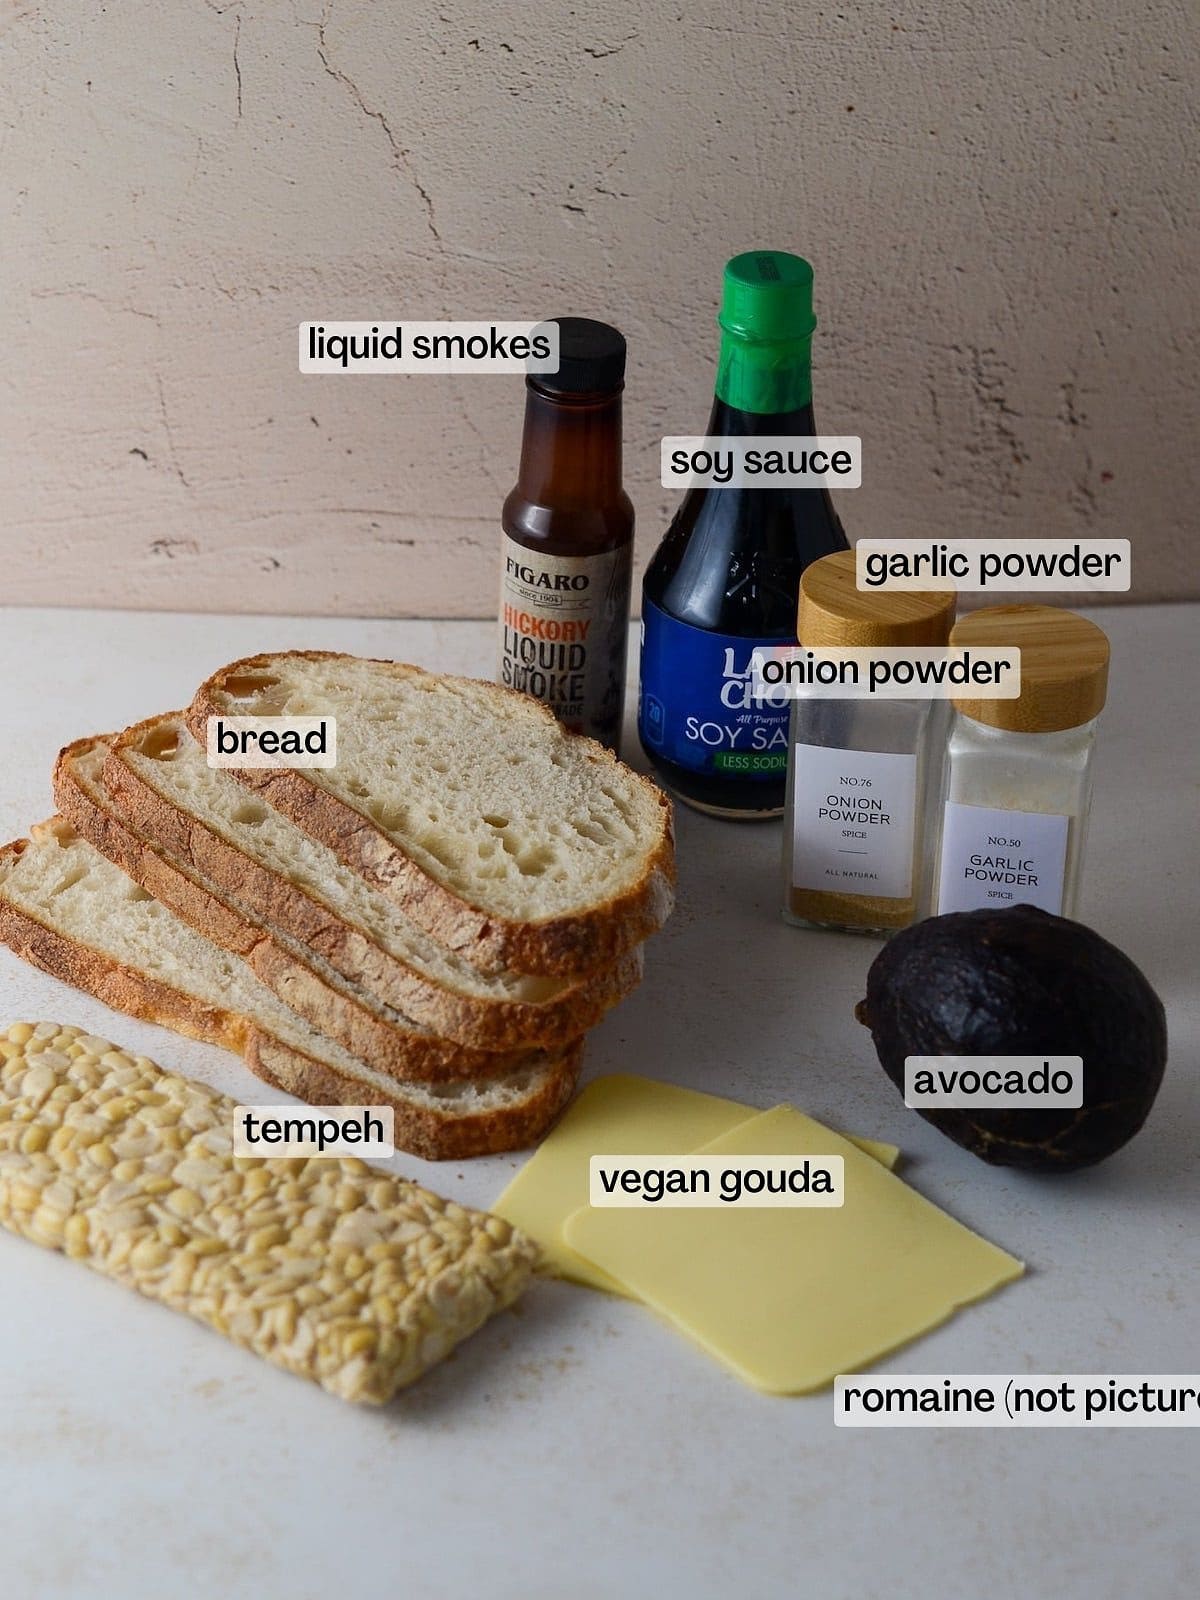 This is a photo of the ingredients for tempeh sandwich. 